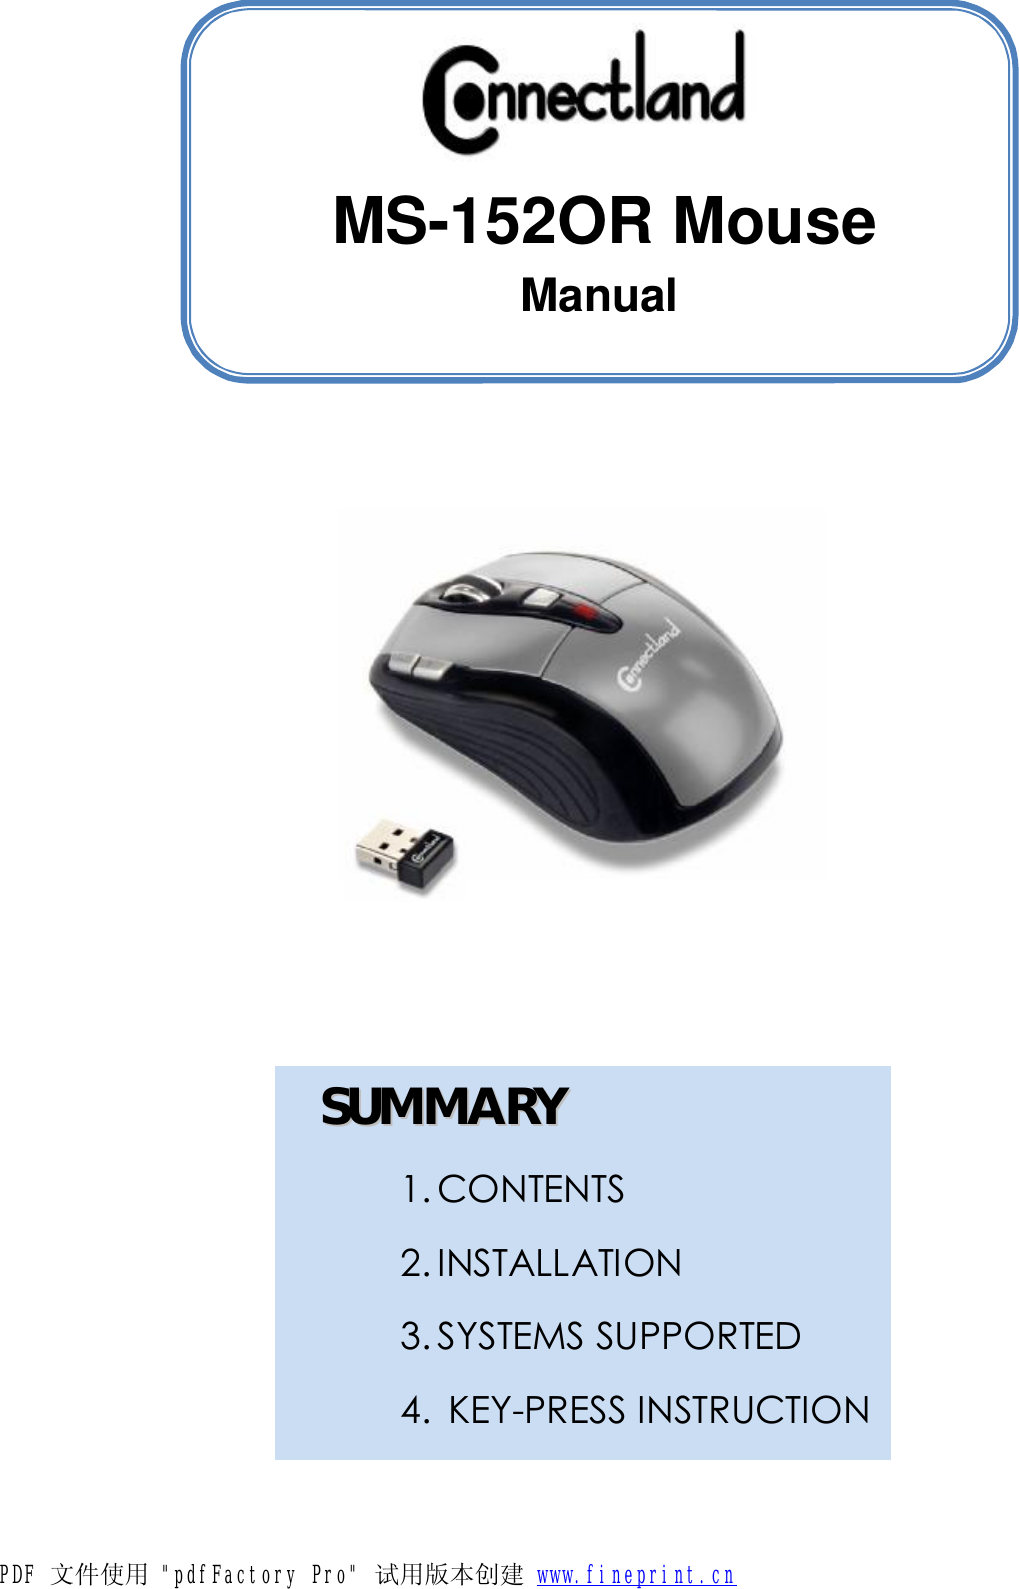                       MS-152OR Mouse Manual  SSUUMMMMAARRYY  1. CONTENTS 2. INSTALLATION 3. SYSTEMS SUPPORTED 4.  KEY-PRESS INSTRUCTION PDF 文件使用 &quot;pdfFactory Pro&quot; 试用版本创建           www.fineprint.cn